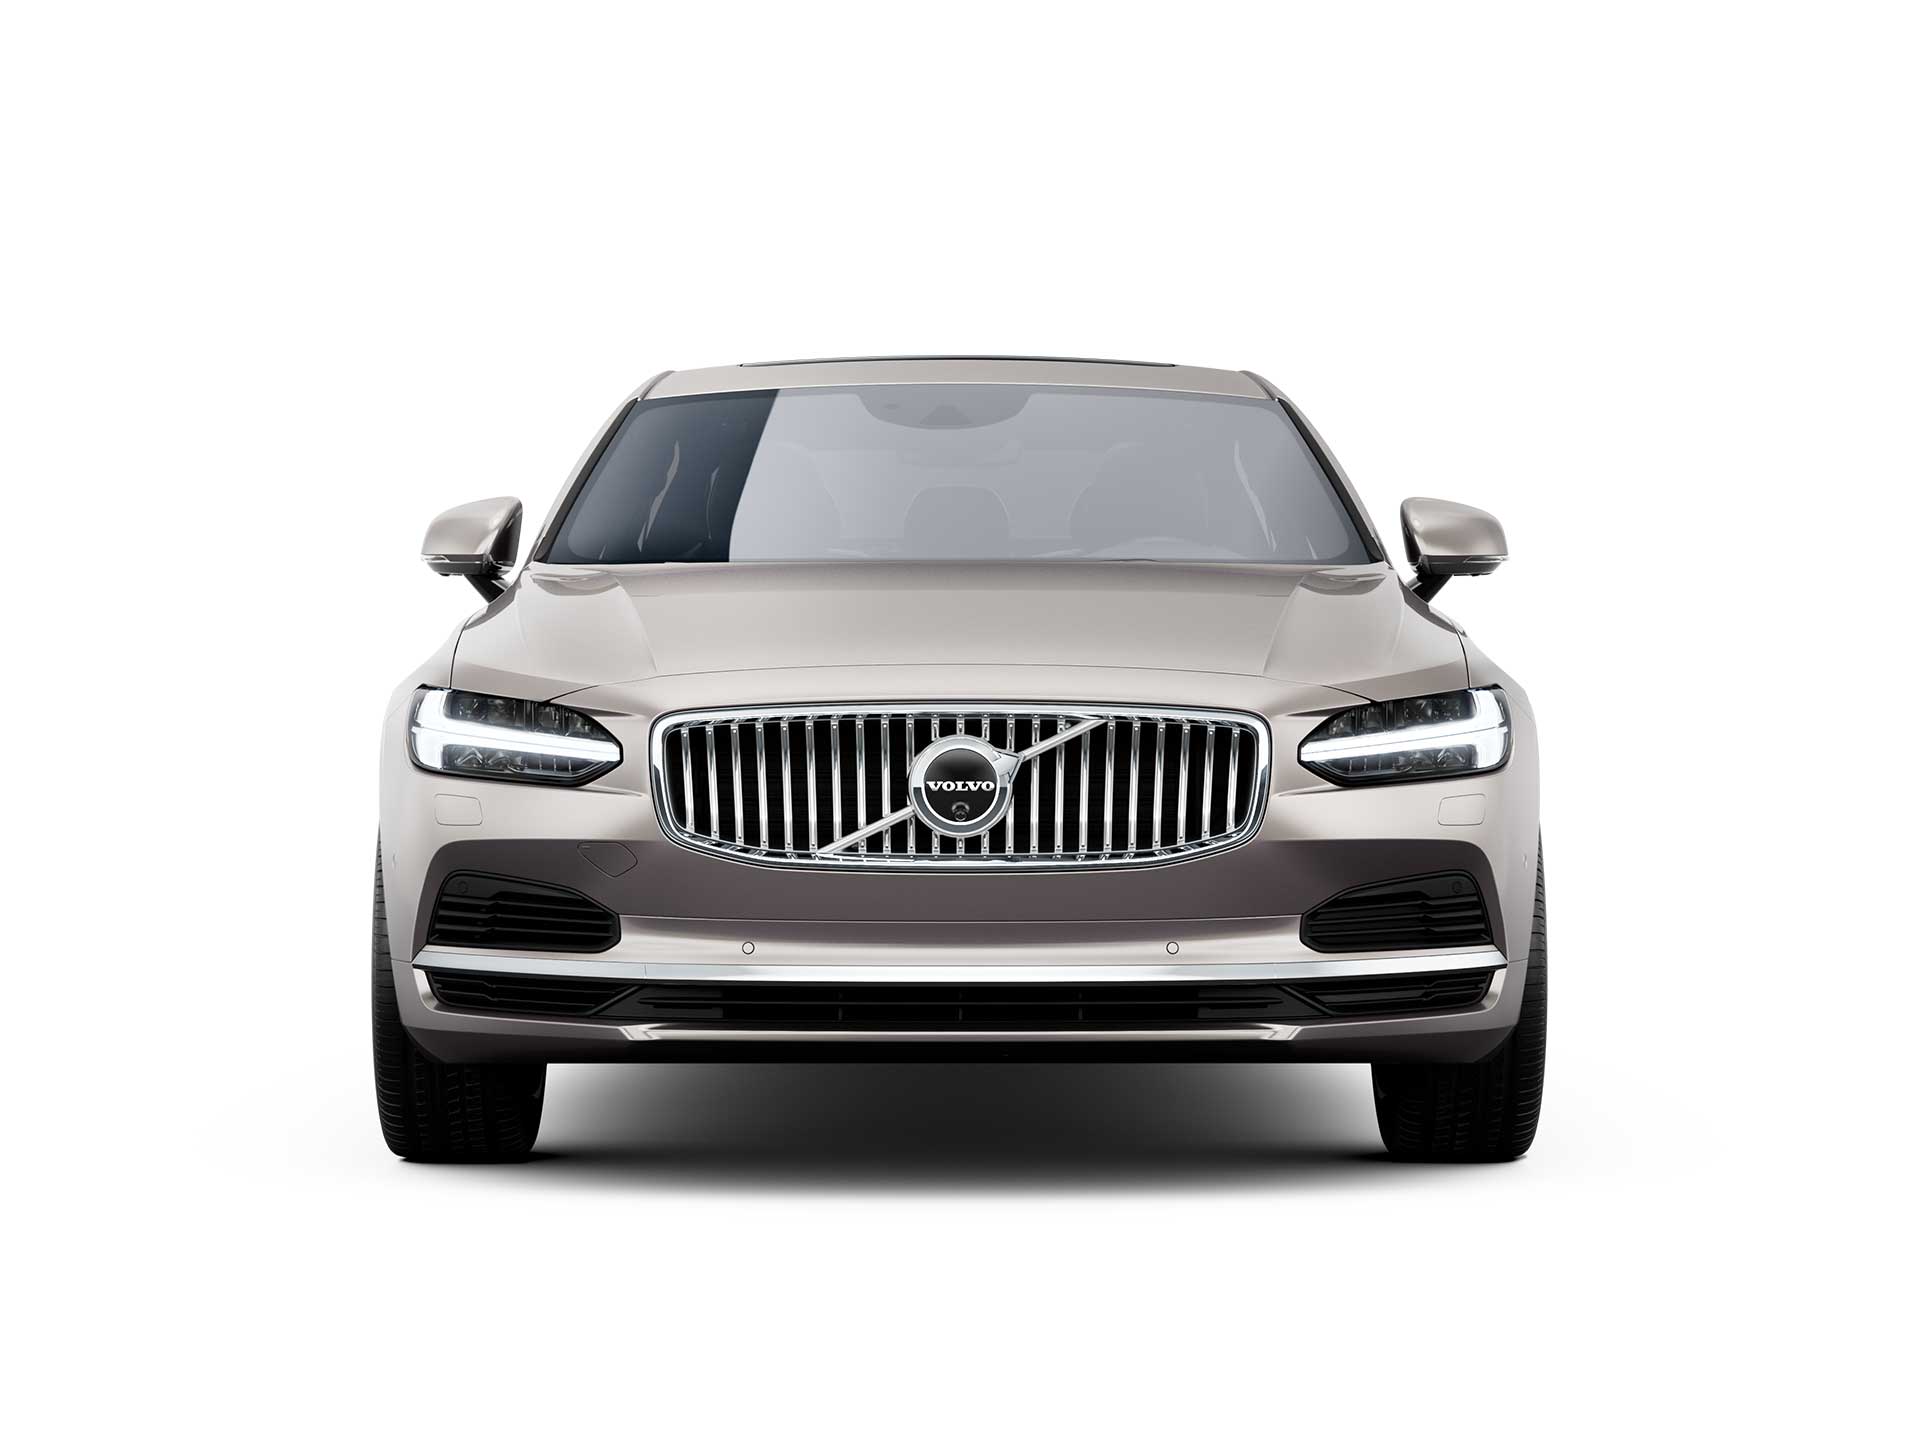 The front of a Volvo S90 Recharge plug-in hybrid sedan.